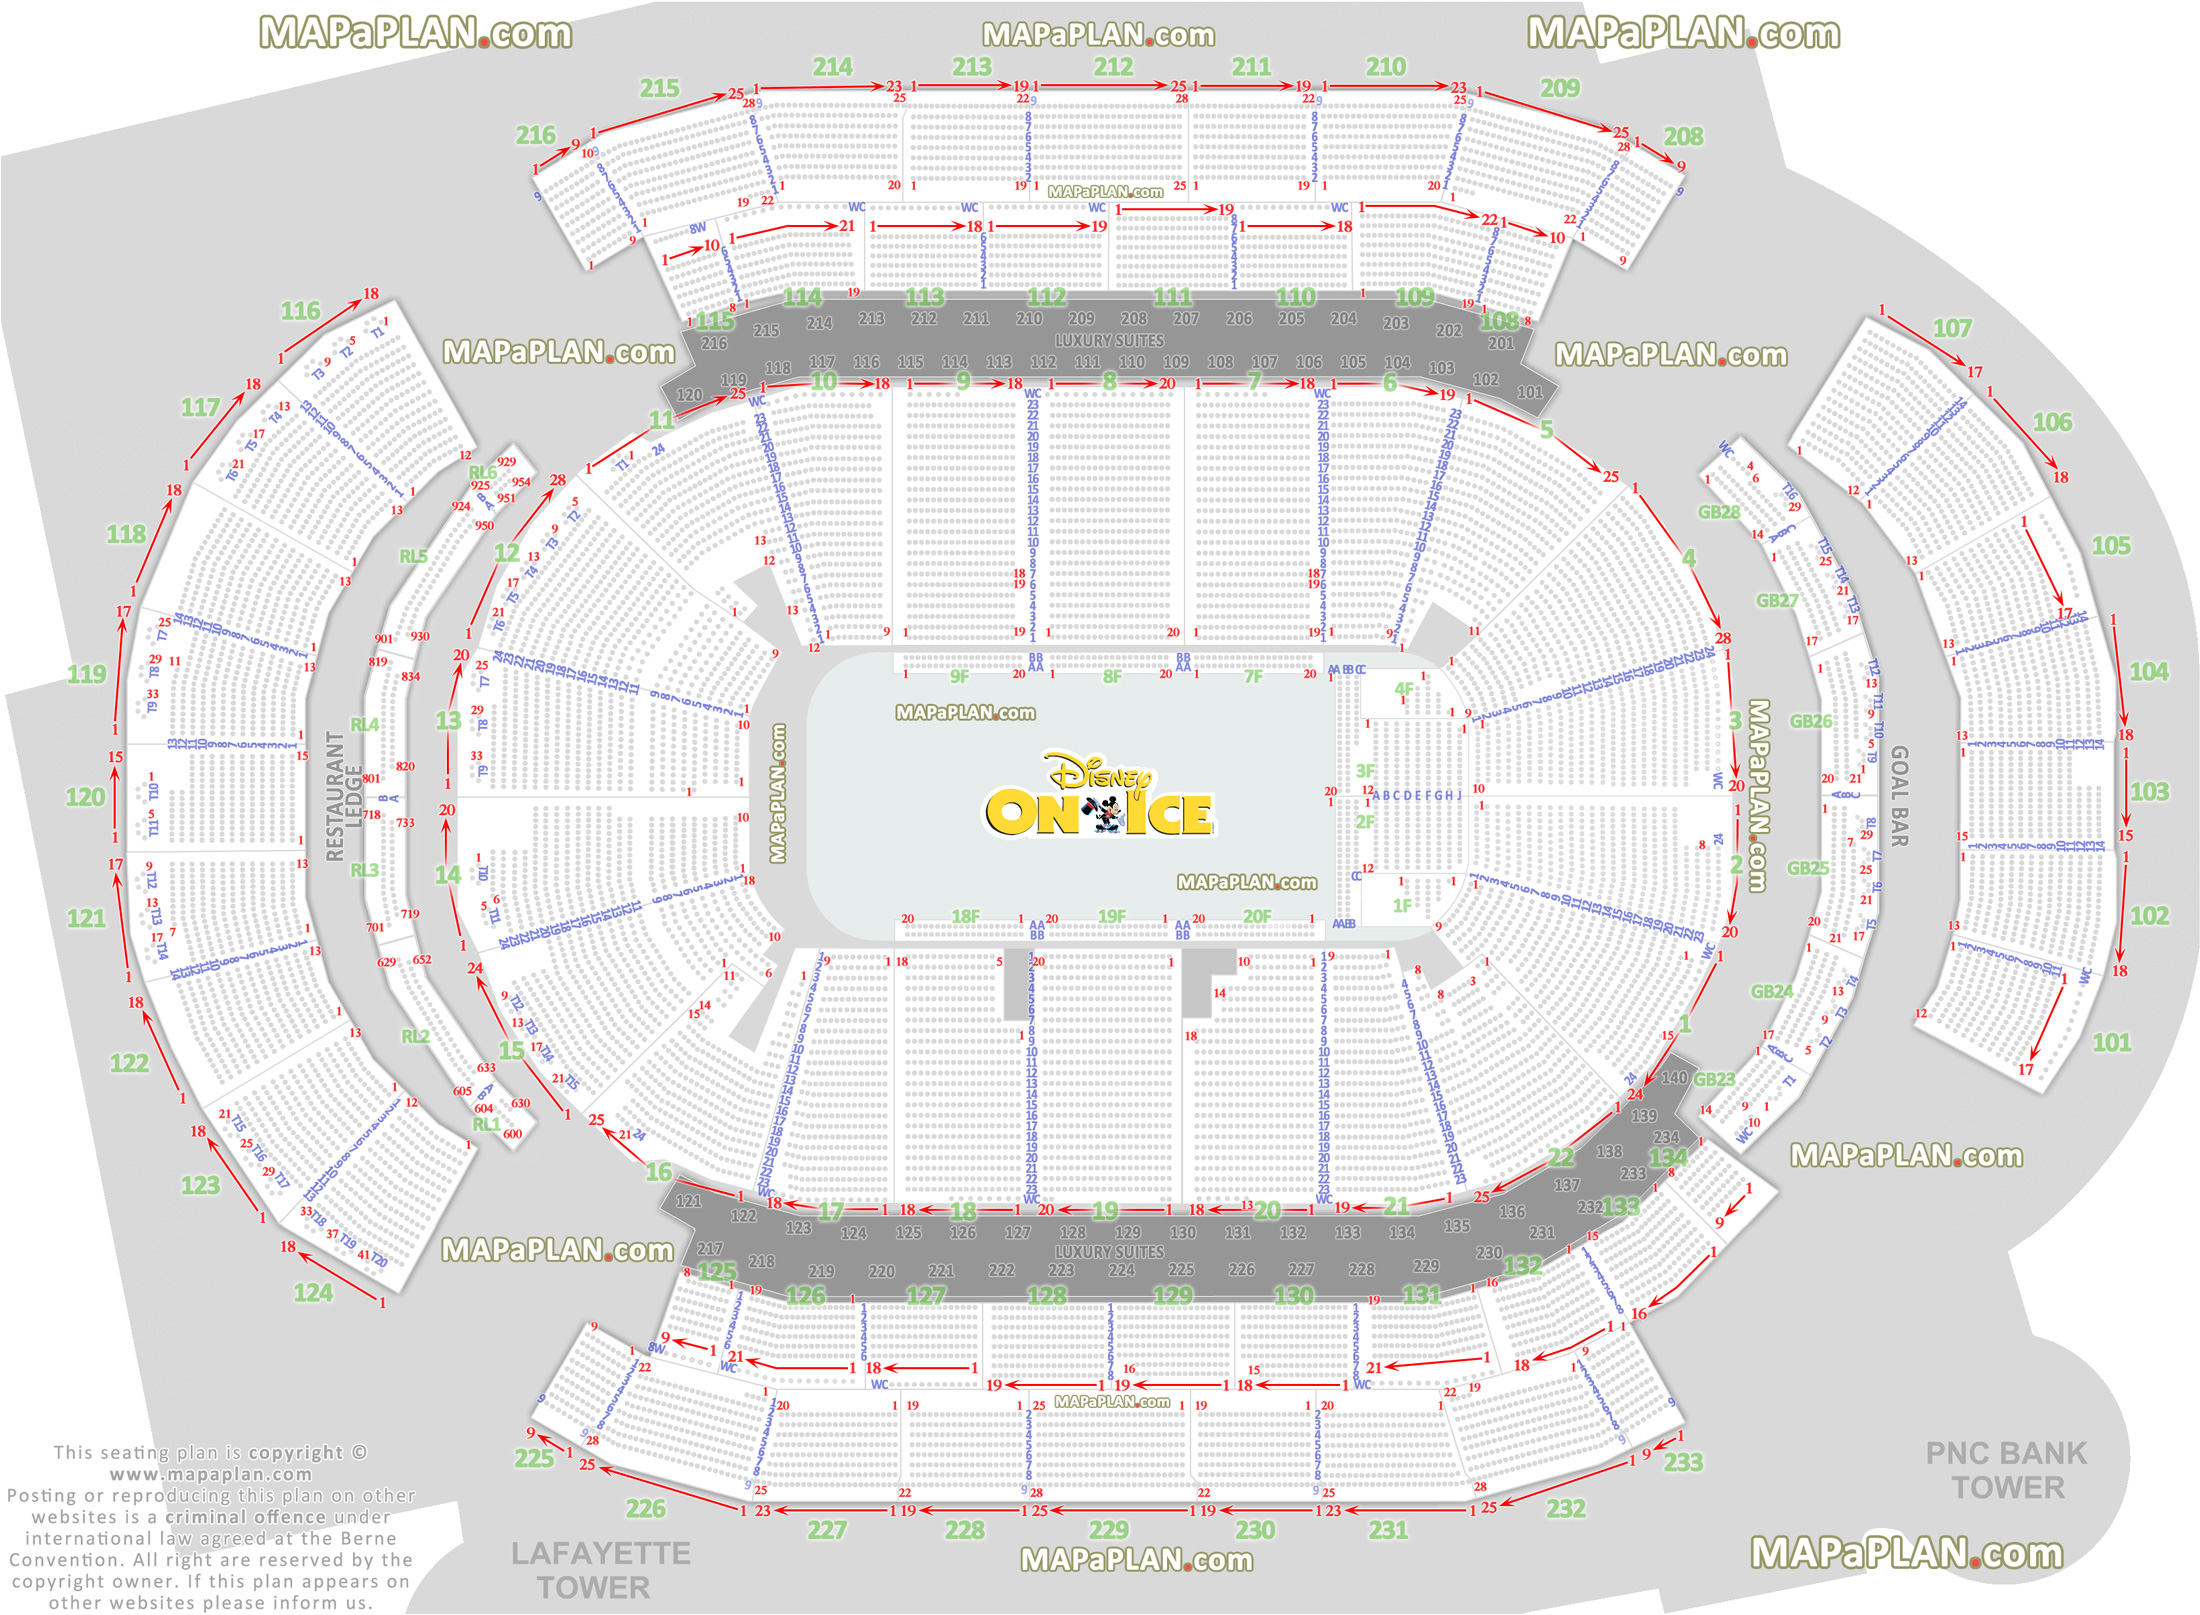 disney on ice find your seat diagram showing wc row numbering mezzanine area vip box arrangement Newark Prudential Center seating chart